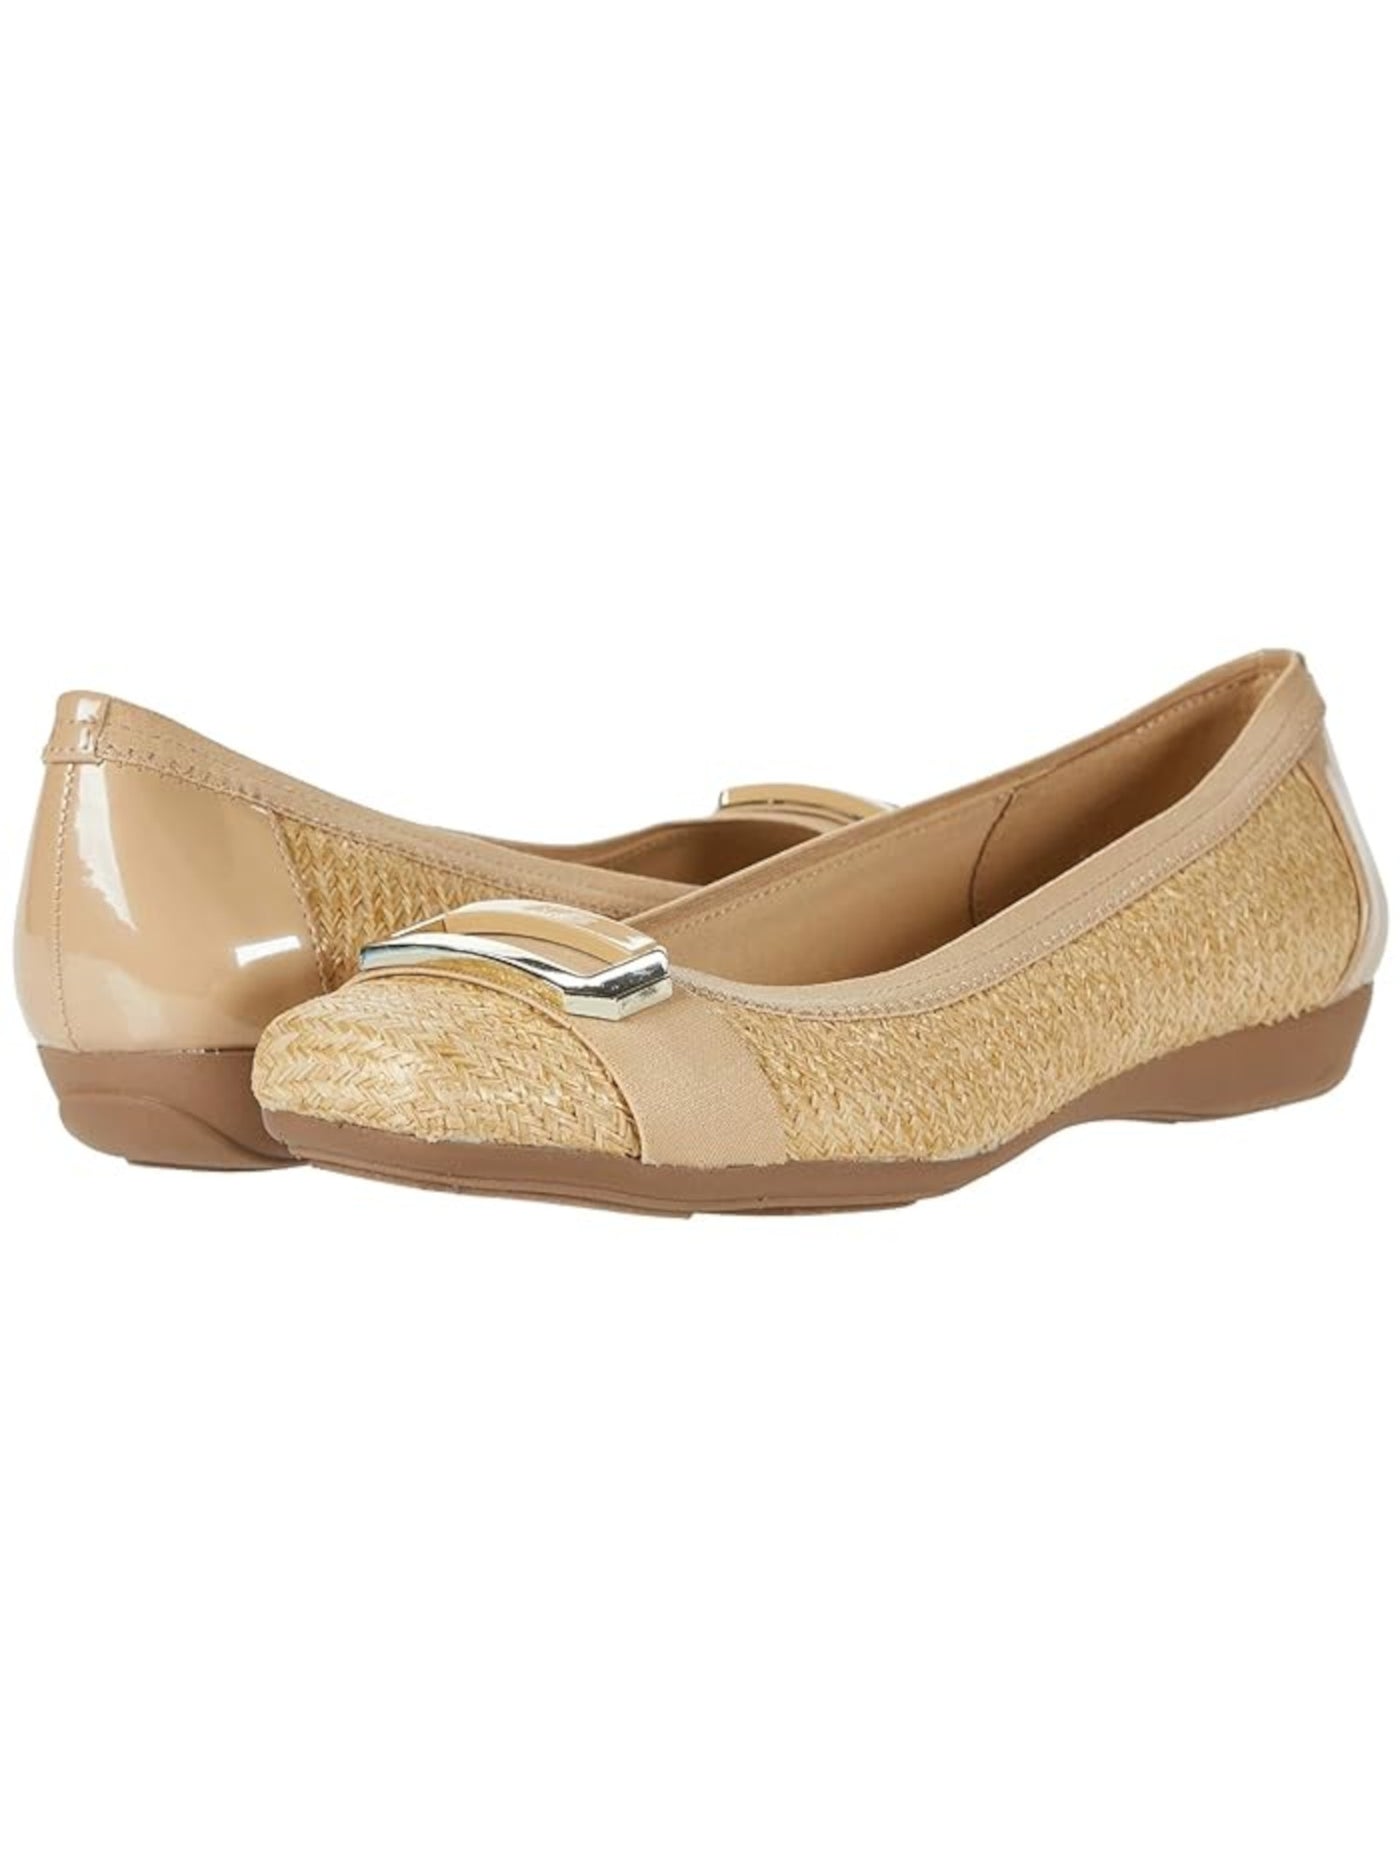 ANNE KLEIN SPORT Womens Beige Stretch Lightweight Woven Buckle Accent Cushioned Uplift Square Toe Wedge Slip On Ballet Flats 10 M